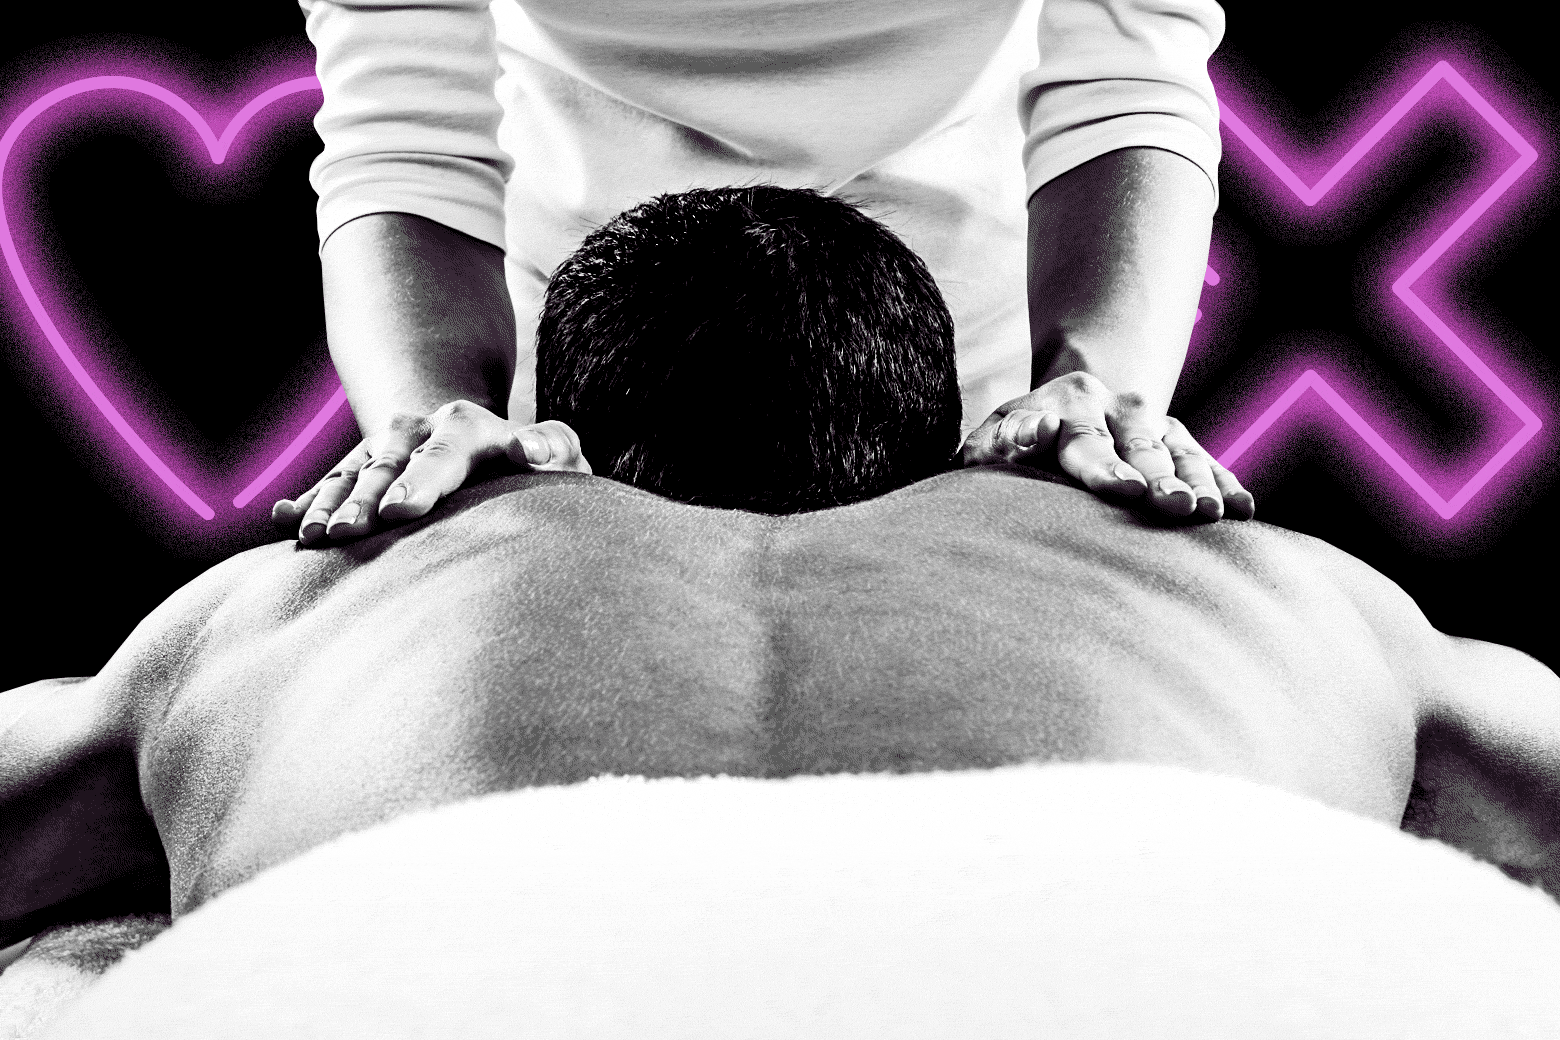 My wife shut down our sex life—is it wrong I go to massage parlors instead? photo